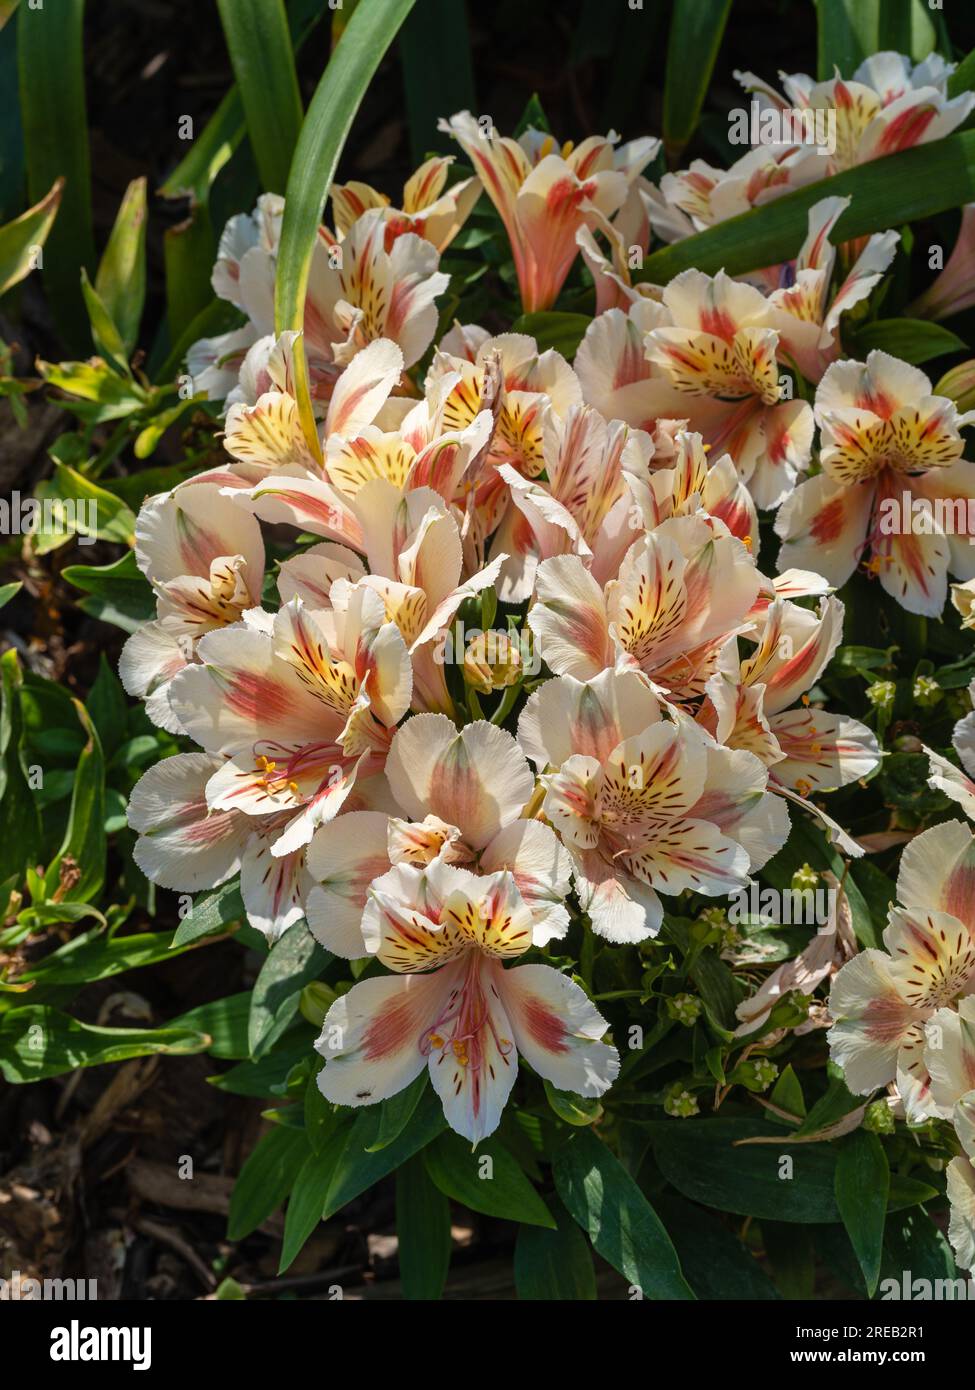 Closeup view of bright and colorful orange yellow and creamy white flowers of alstroemeria aka Peruvian lily or lily of the Incas blooming in garden Stock Photo